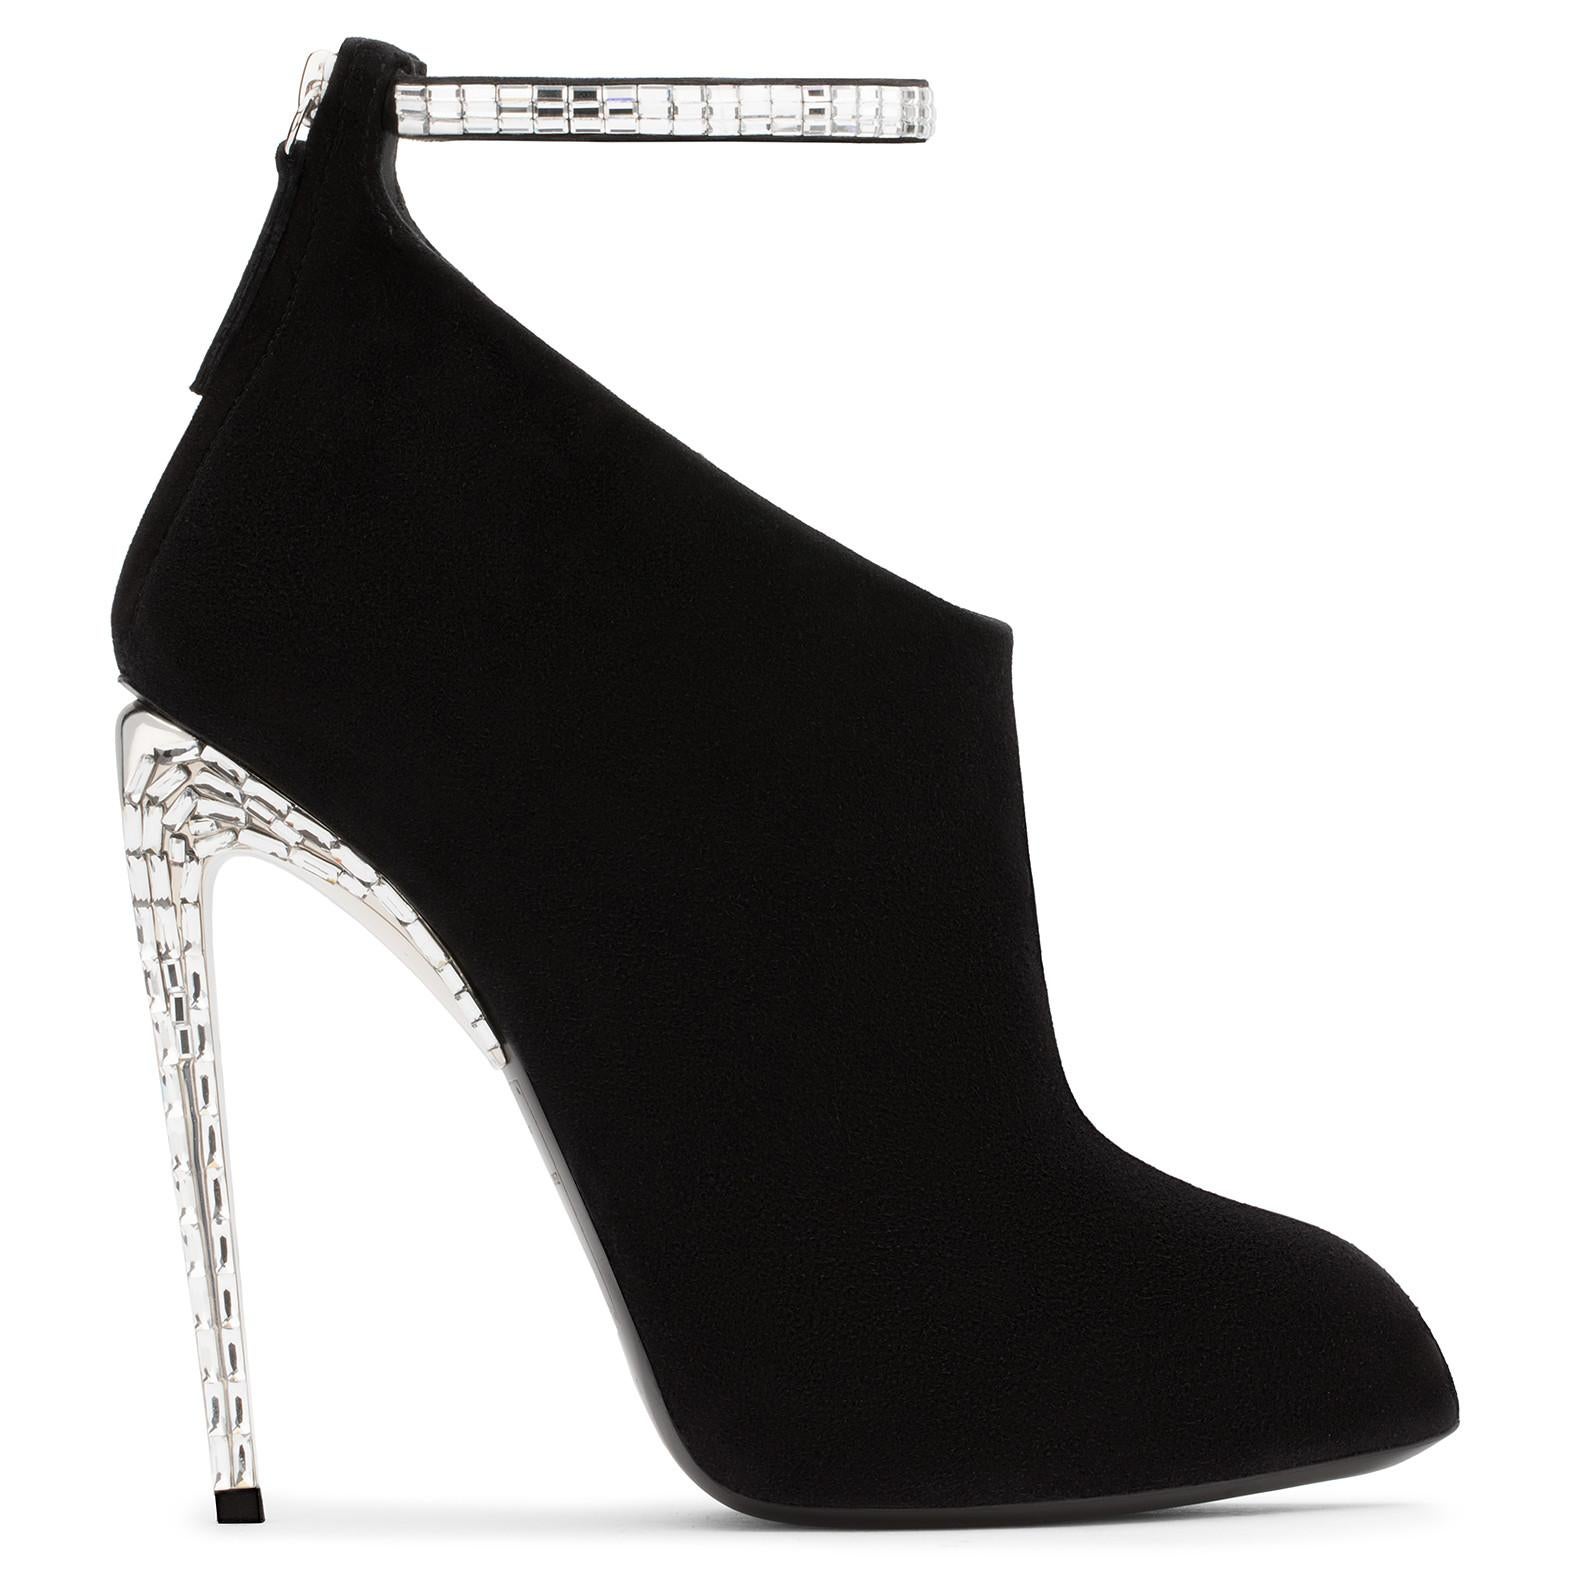 Women's Giuseppe Zanotti NEW Black Suede Crystal Strass Ankle Evening Boots Booties 